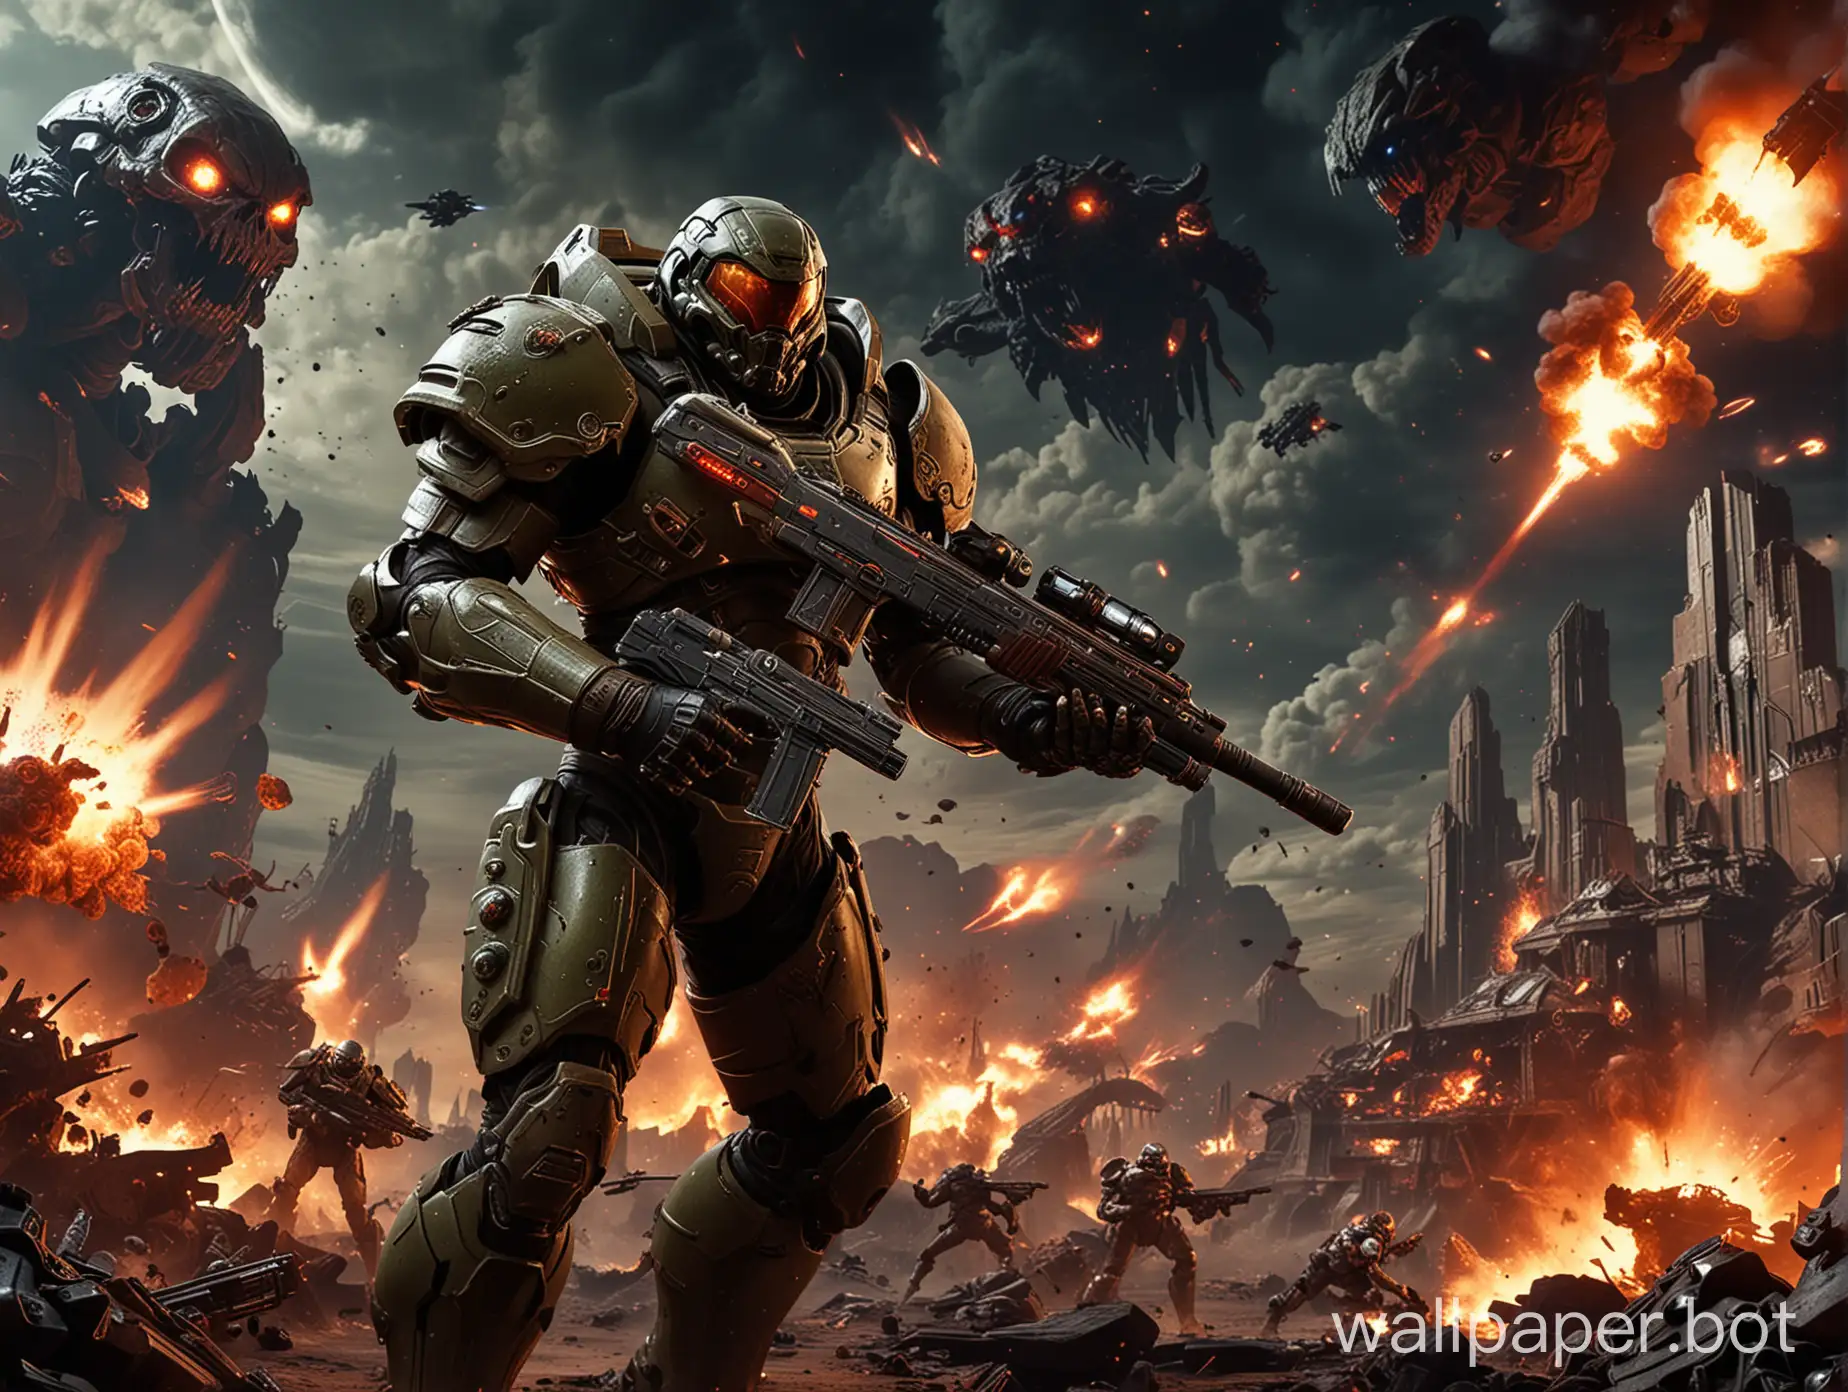 The main character from the game Doom walks in his armor on an alien planet, shooting monsters with a shotgun against the backdrop of an alien city, amid explosions, dark background.